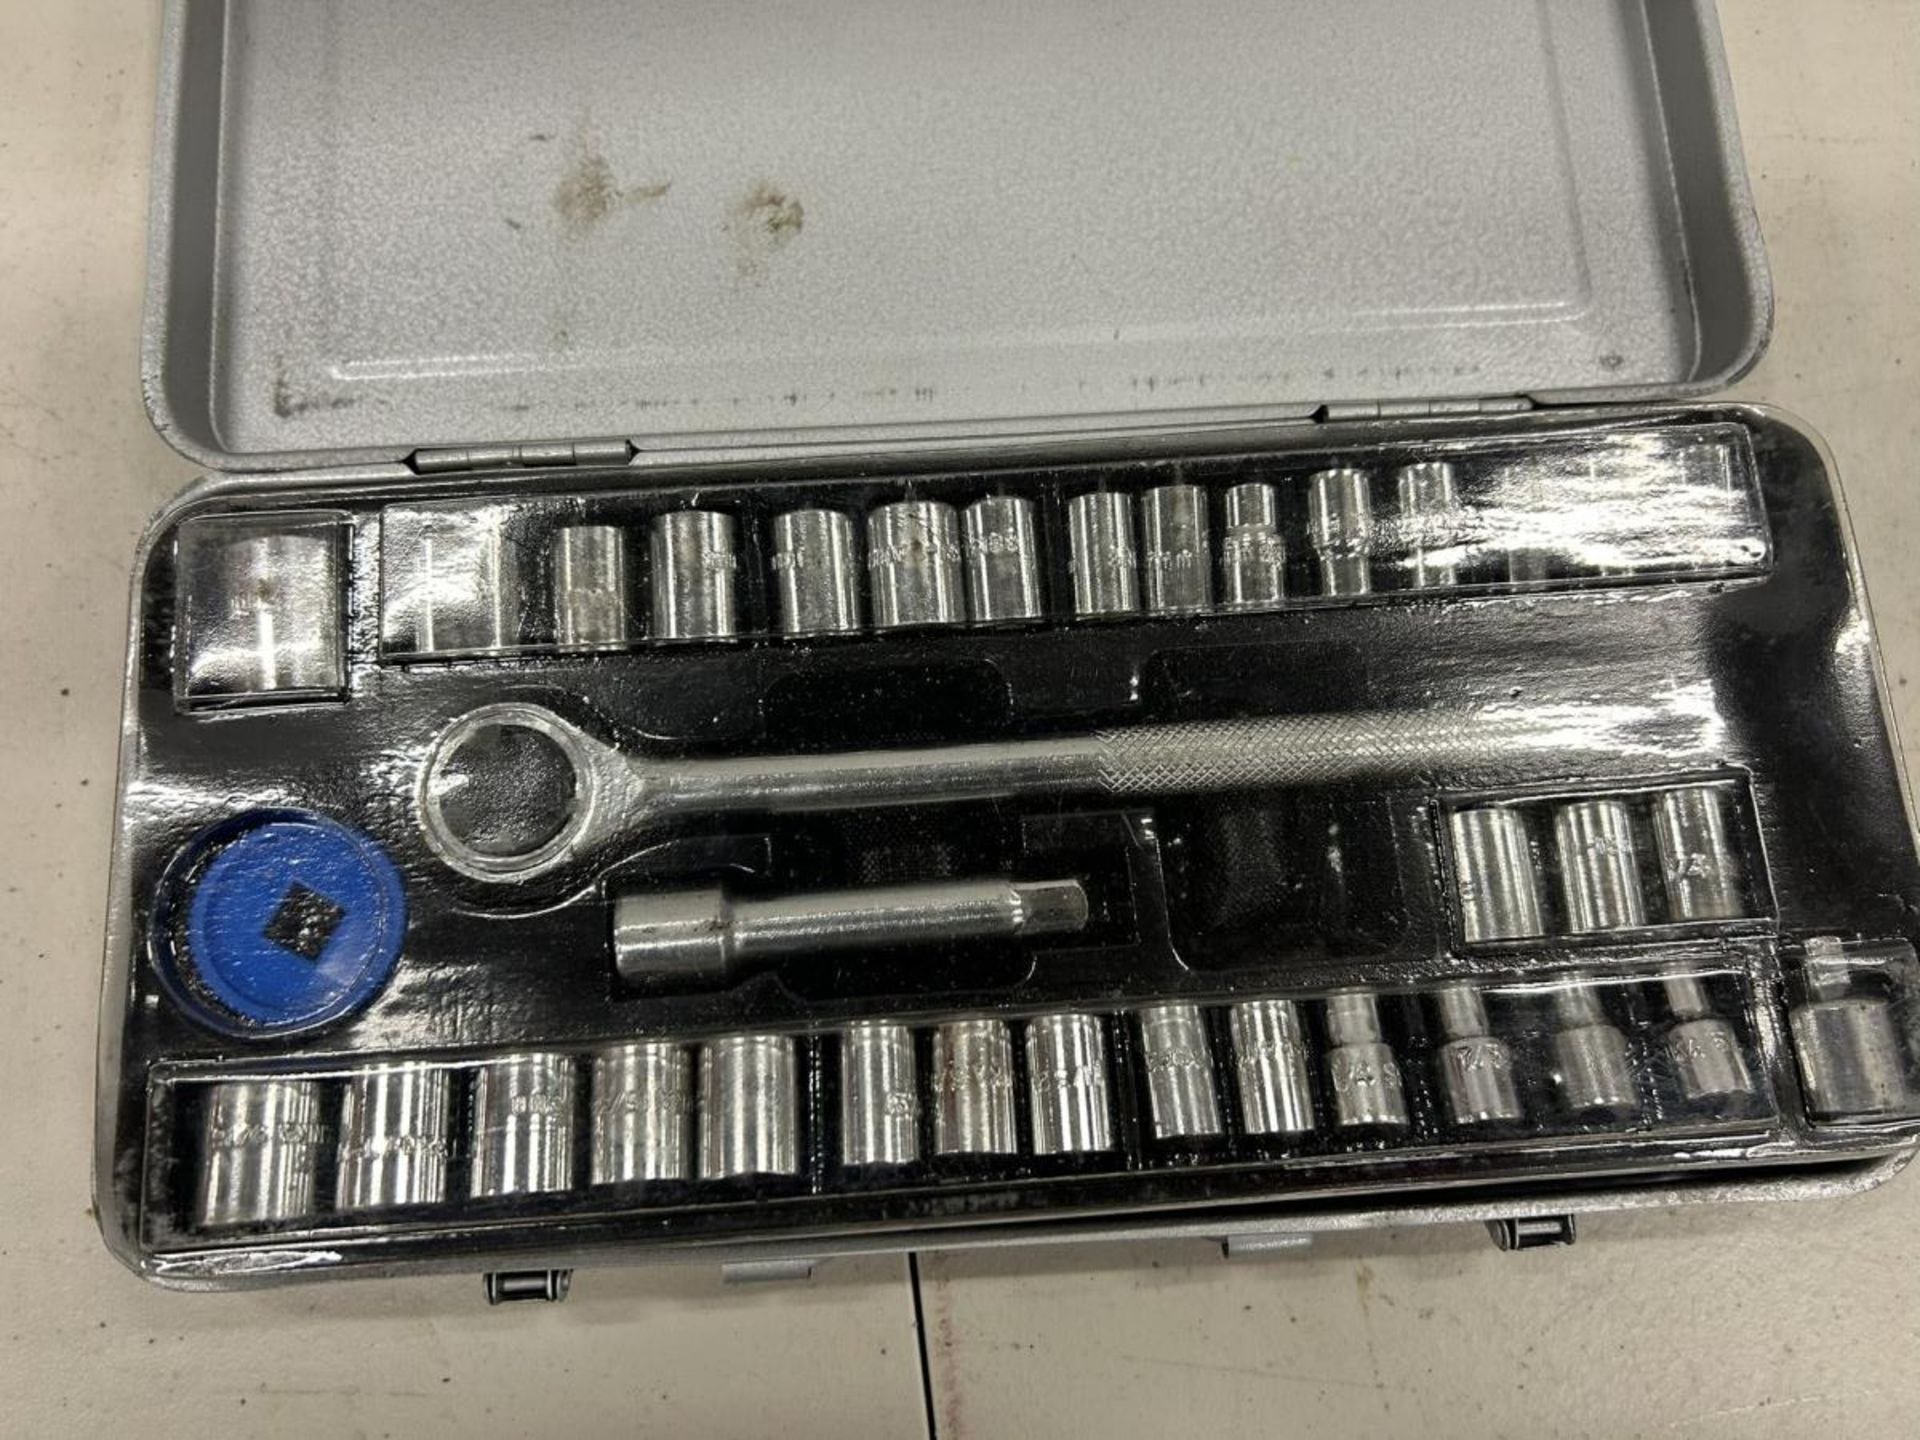 CANADIAN TIRE TOOL BOX, ASSORTED TOOLS, AND SOCKET SET - Image 4 of 4